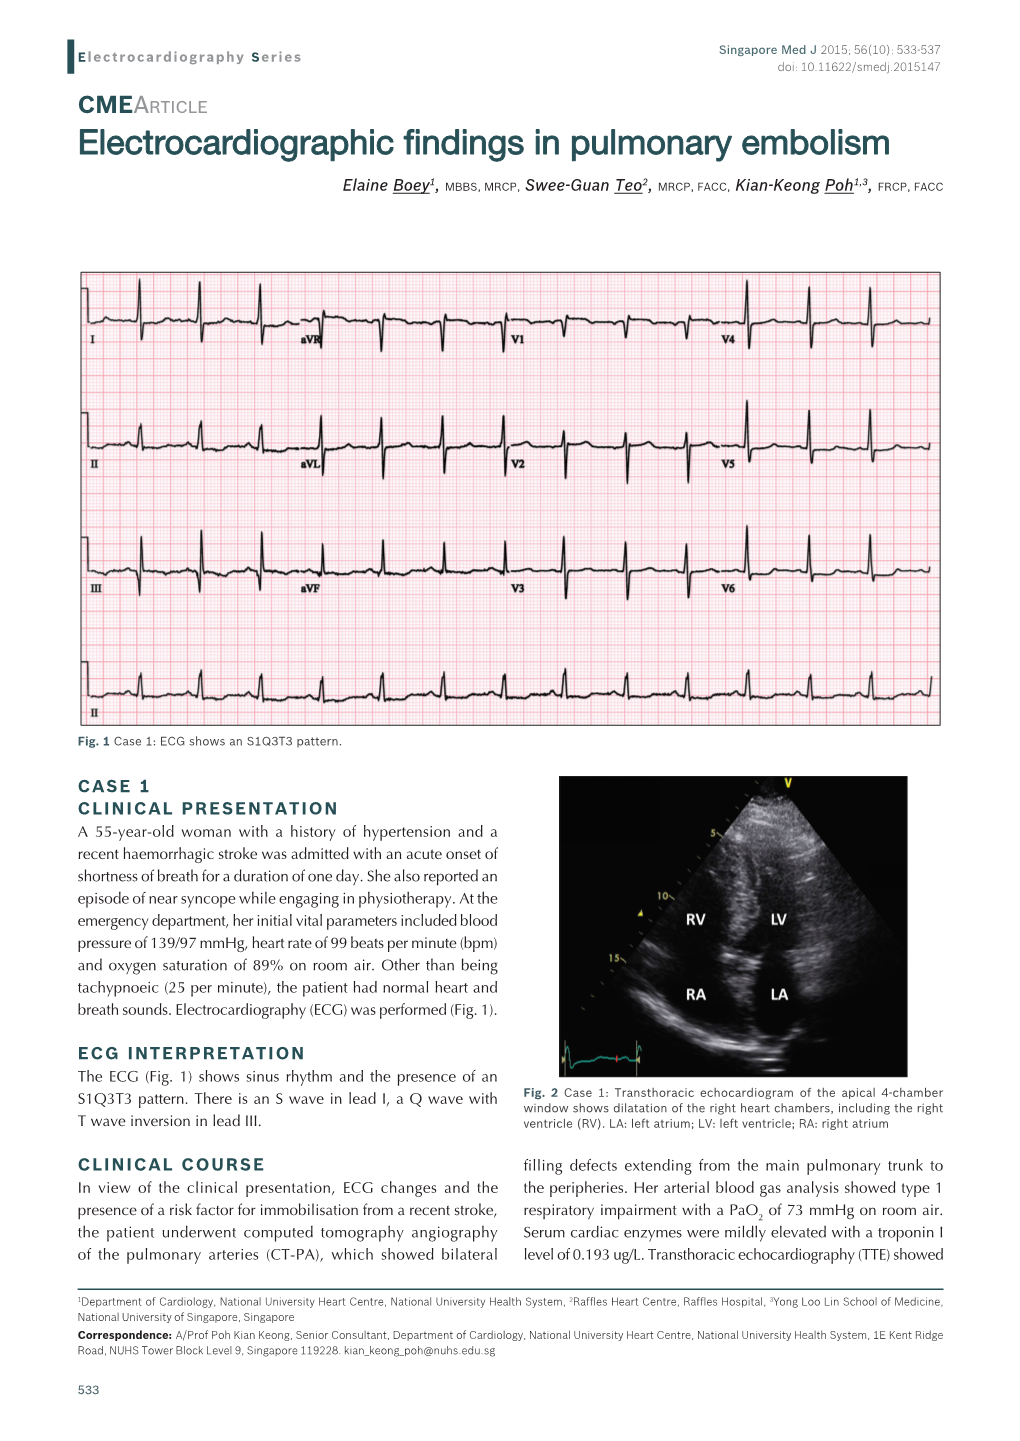 Electrocardiographic Findings in Pulmonary Embolism